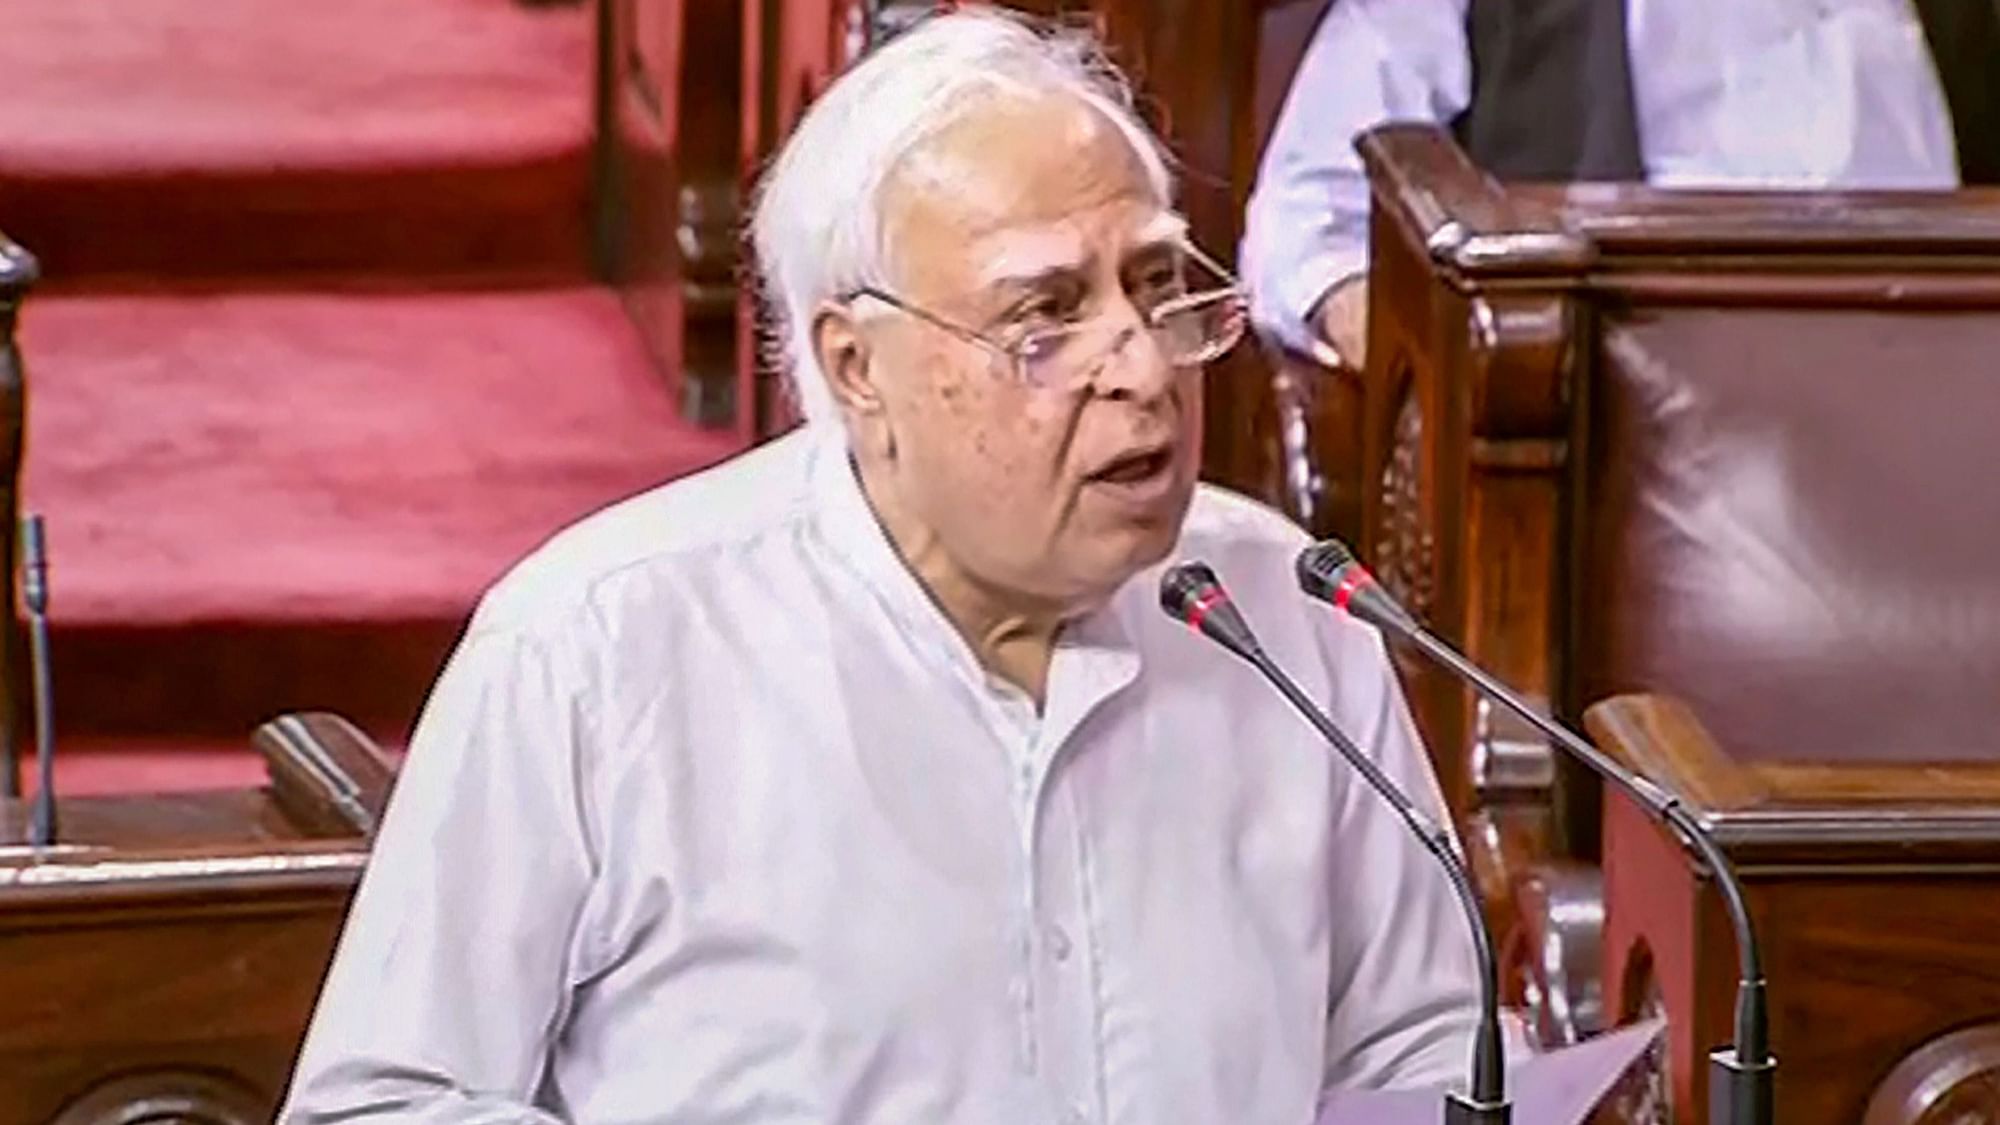 <div class="paragraphs"><p>Rajya Sabha MP and senior advocate <a href="https://www.thequint.com/topic/kapil-sibal">Kapil Sibal</a>, on Saturday, 6 August, while criticising recent judgments made by the <a href="https://www.thequint.com/topic/supreme-court">Supreme Court</a>, said that he had "no hope left" in the institution.</p></div>